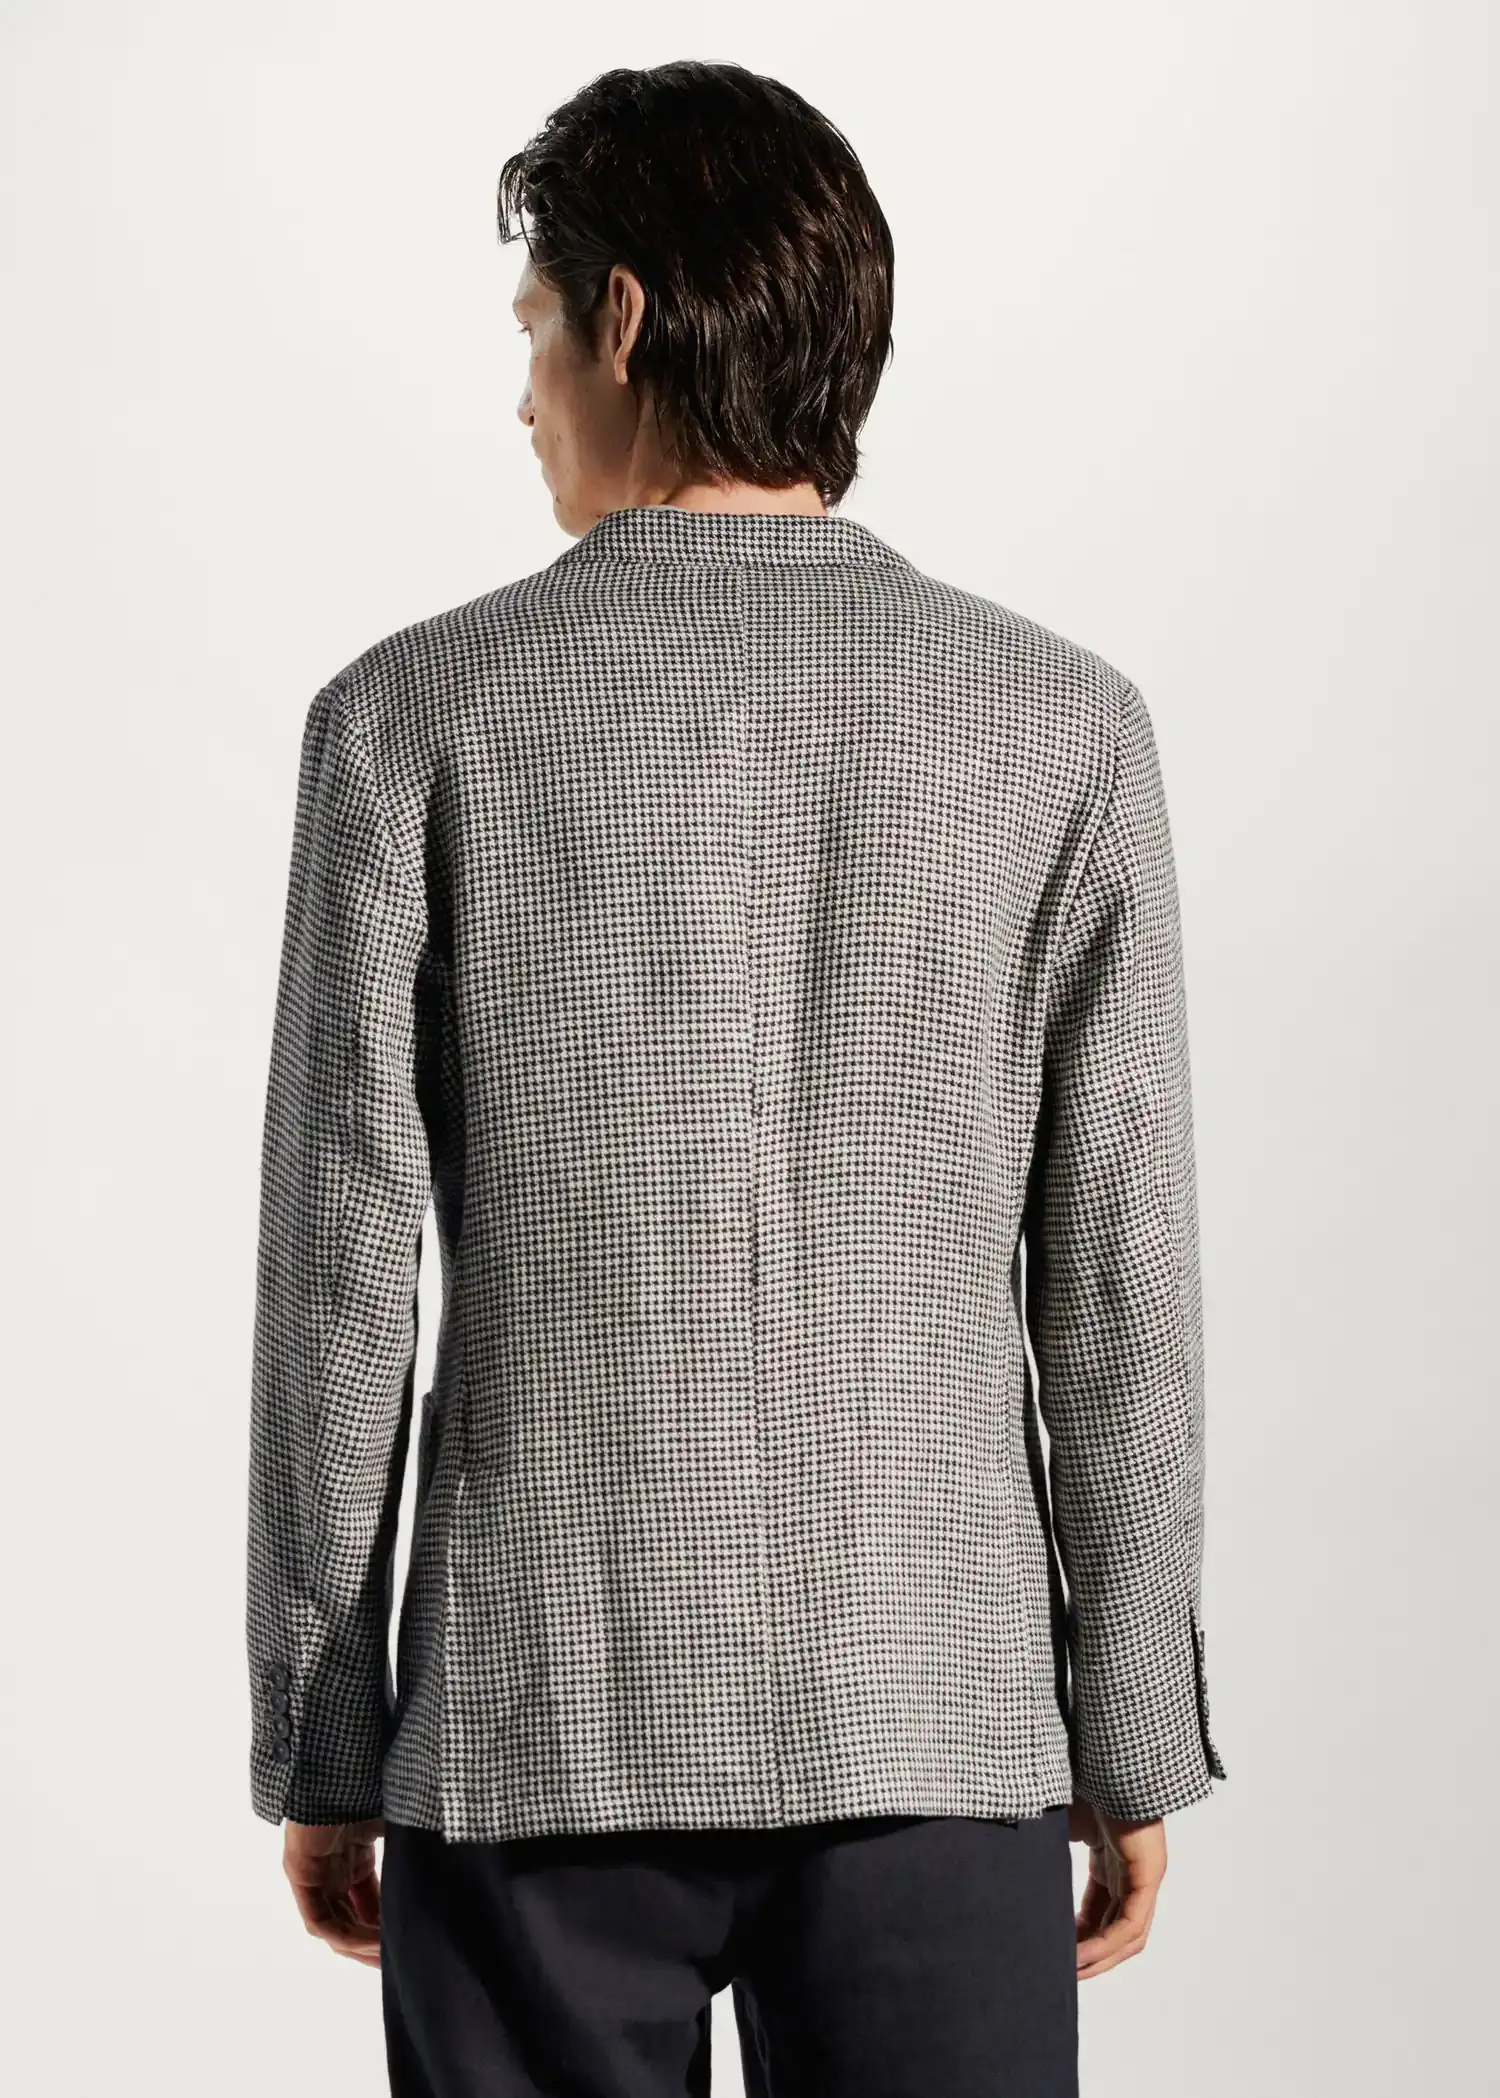 Mango 100% linen micro-houndstooth jacket. a man wearing a suit and a tie. 